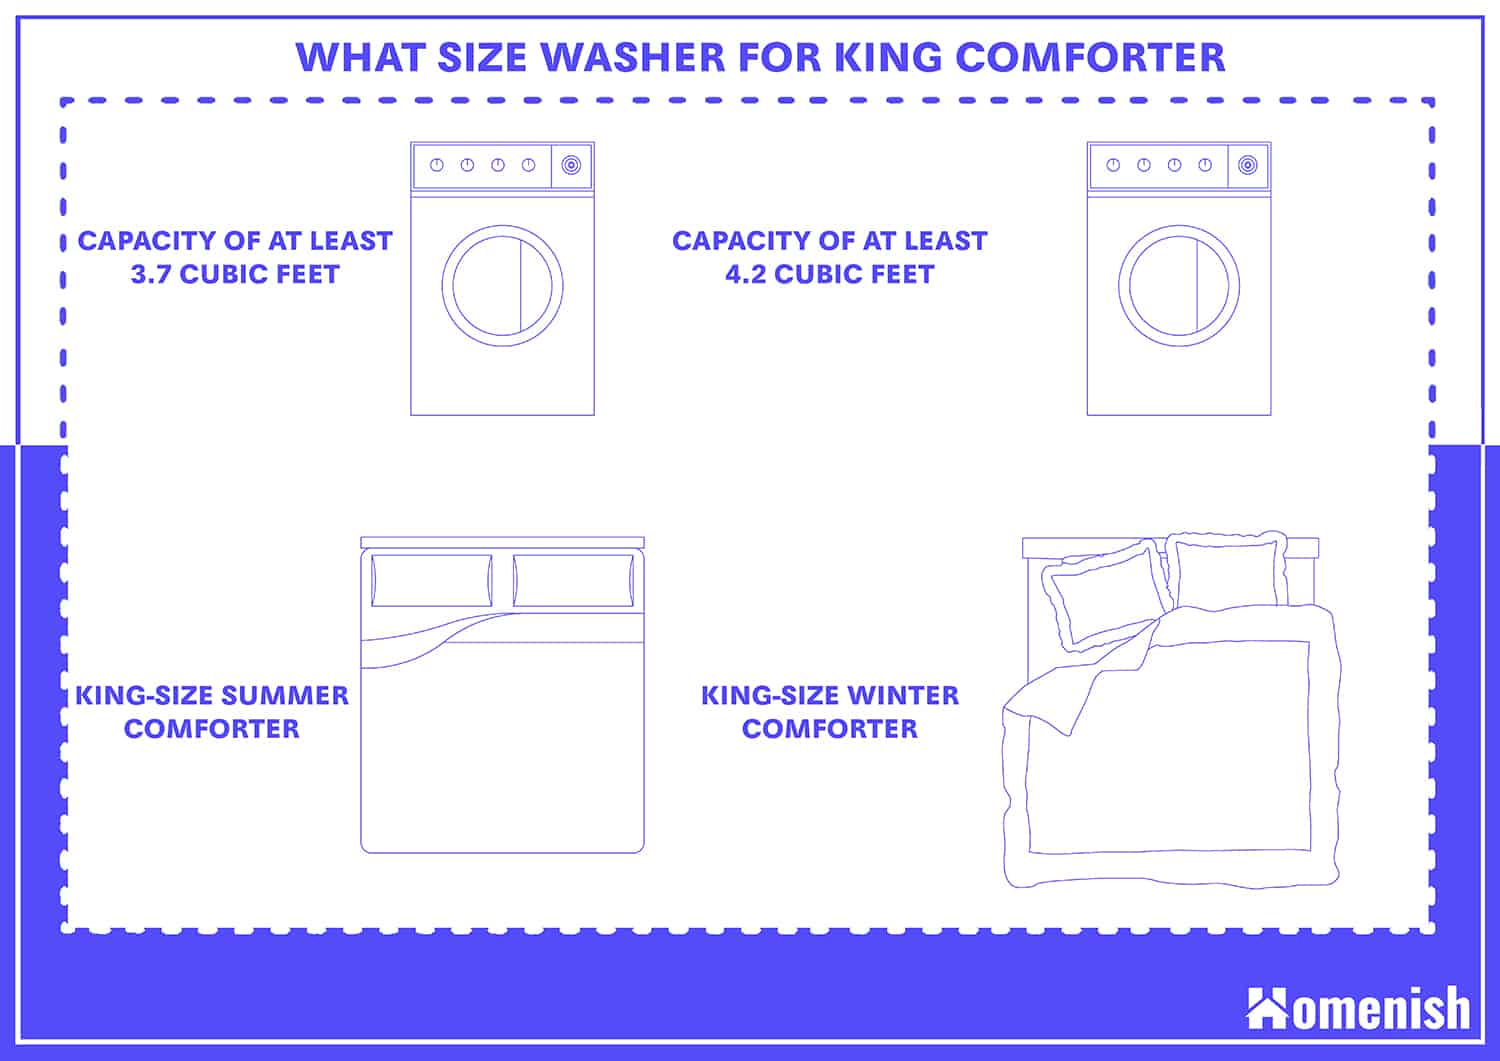 What Size Washer For King Comforter